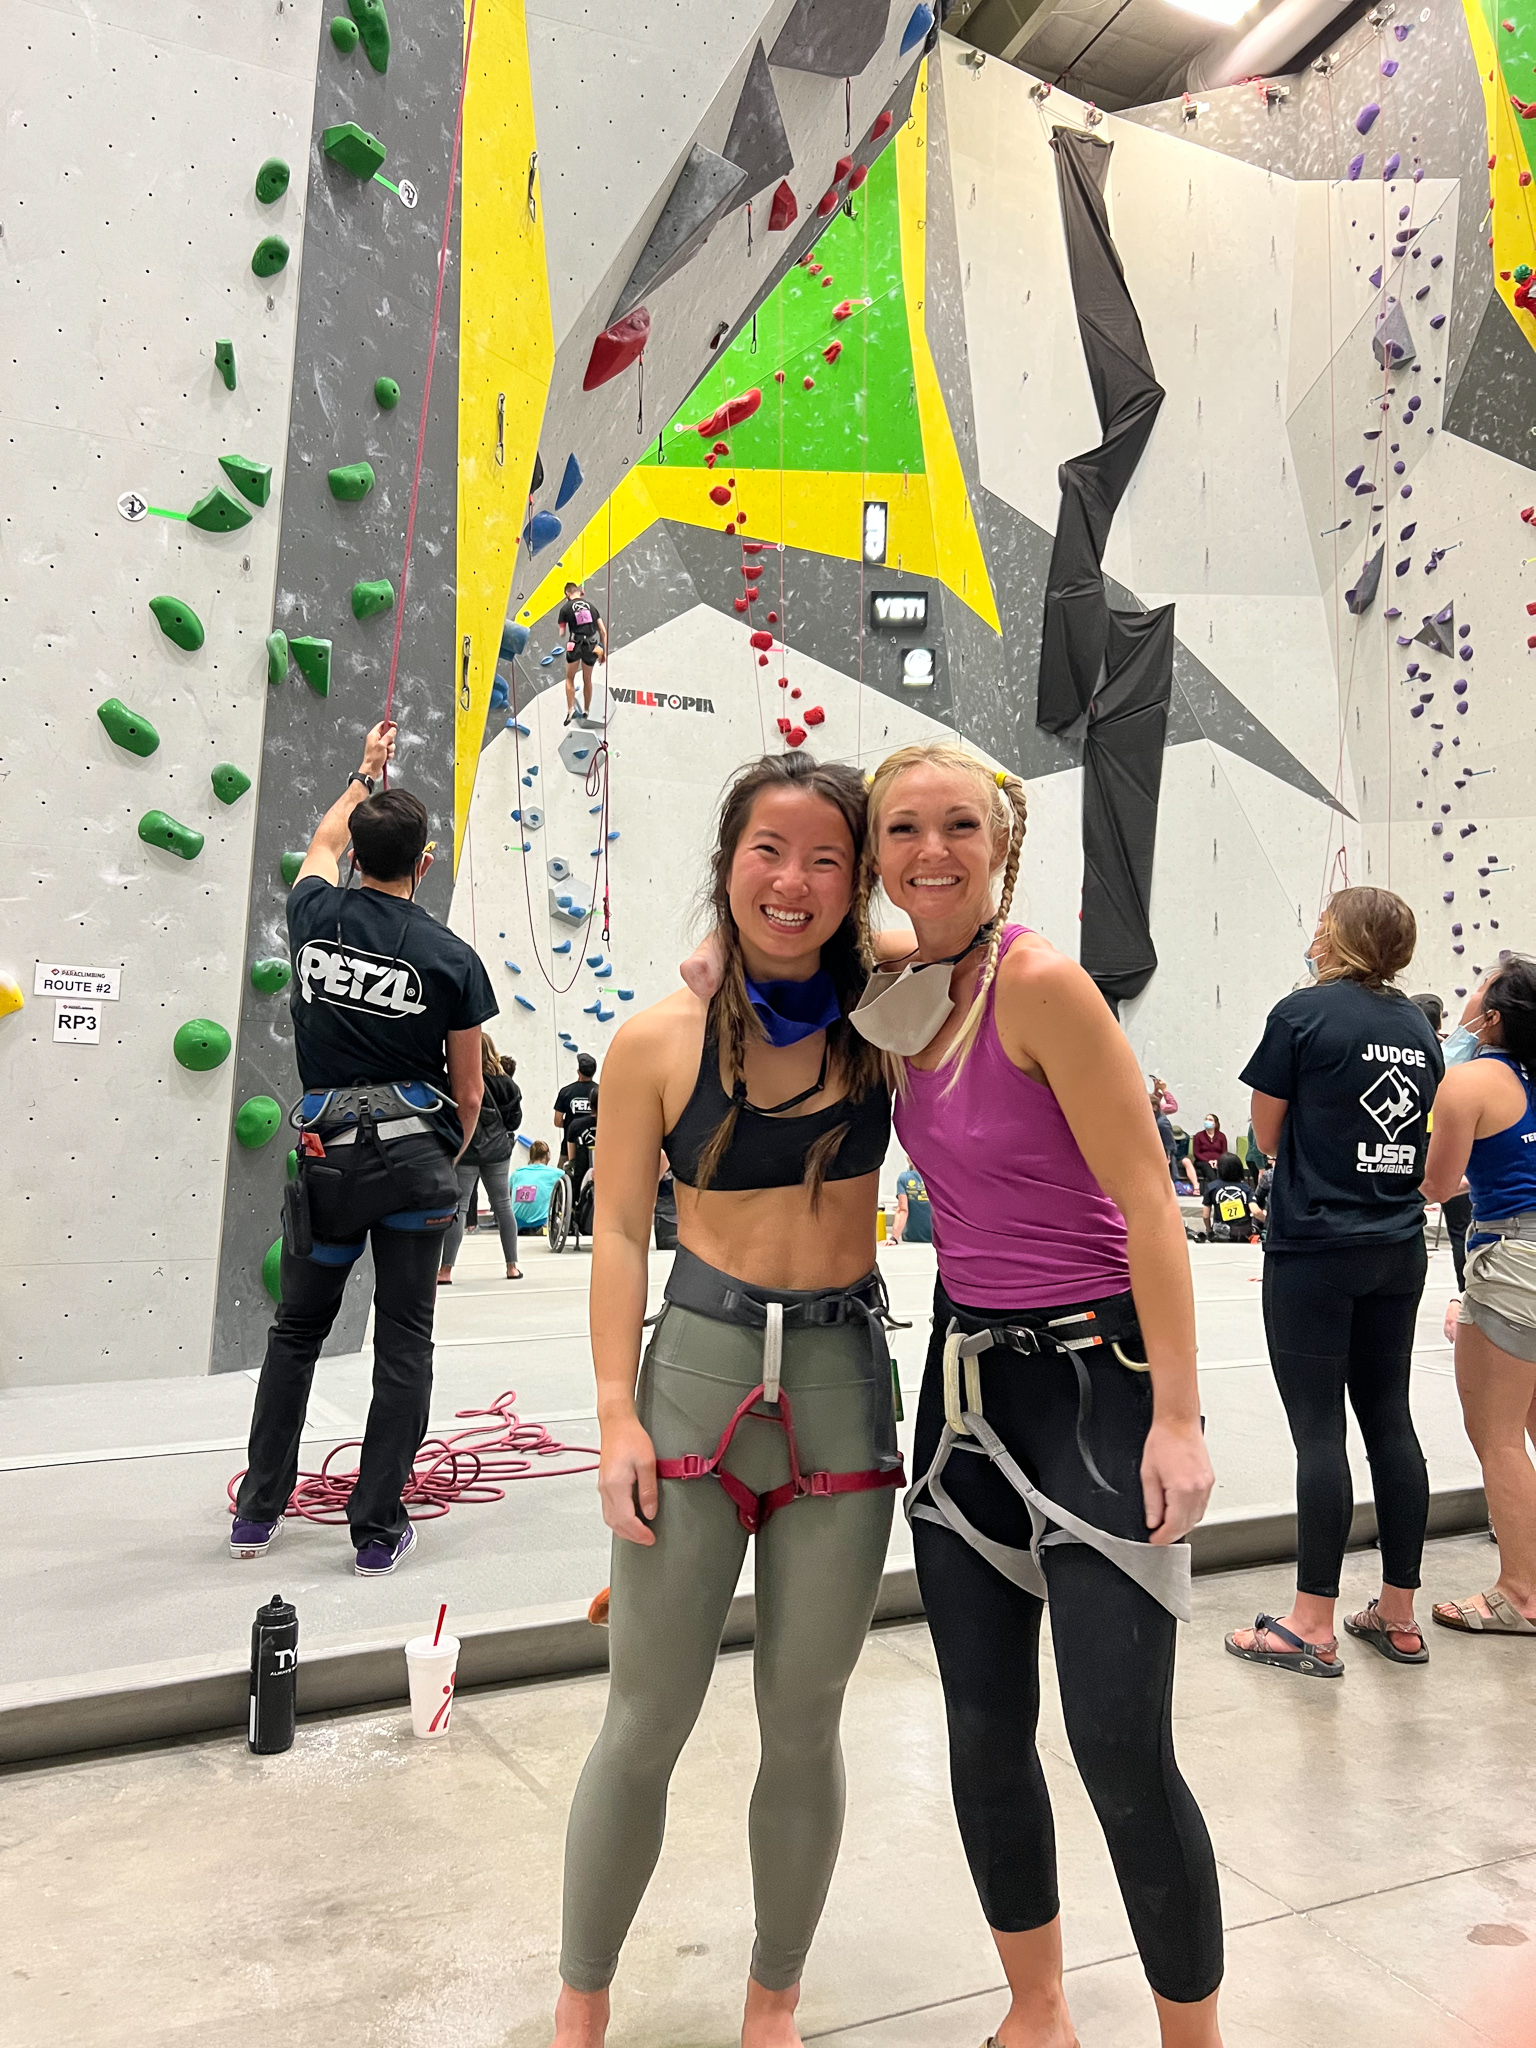 Paradox AAF recipient, Grace, at paraclimbing Nationals, standing in front of a gym wall with a friend